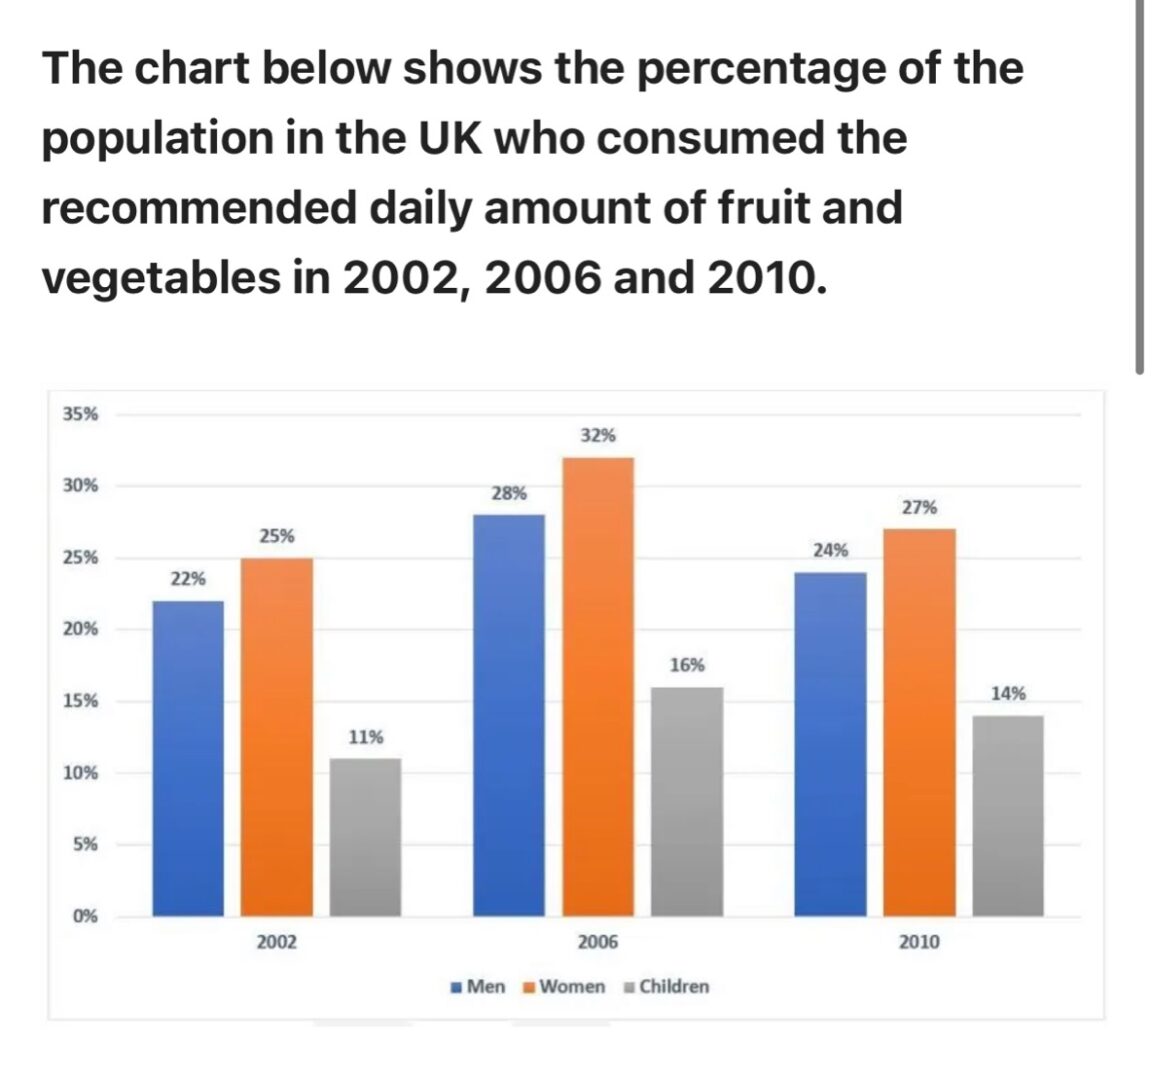 Percentage of UK people who consumed daily recommended amounts of fruit and vegetables in 2002, 2006 and 2010